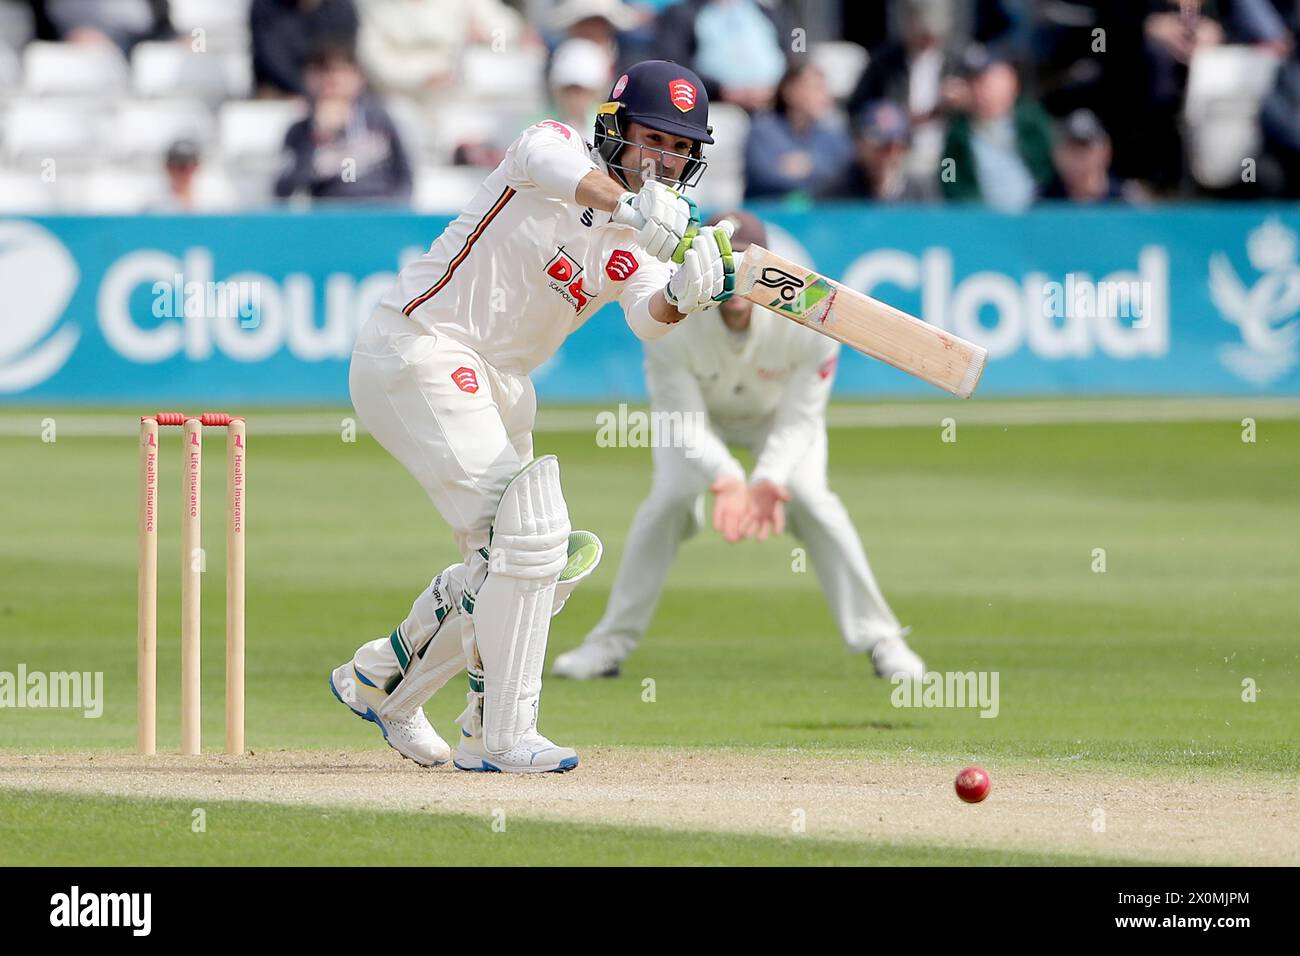 Dean Elgar hits 4 runs for Essex during Essex CCC vs Kent CCC, Vitality County Championship Division 1 Cricket at The Cloud County Ground on 12th Apri Stock Photo